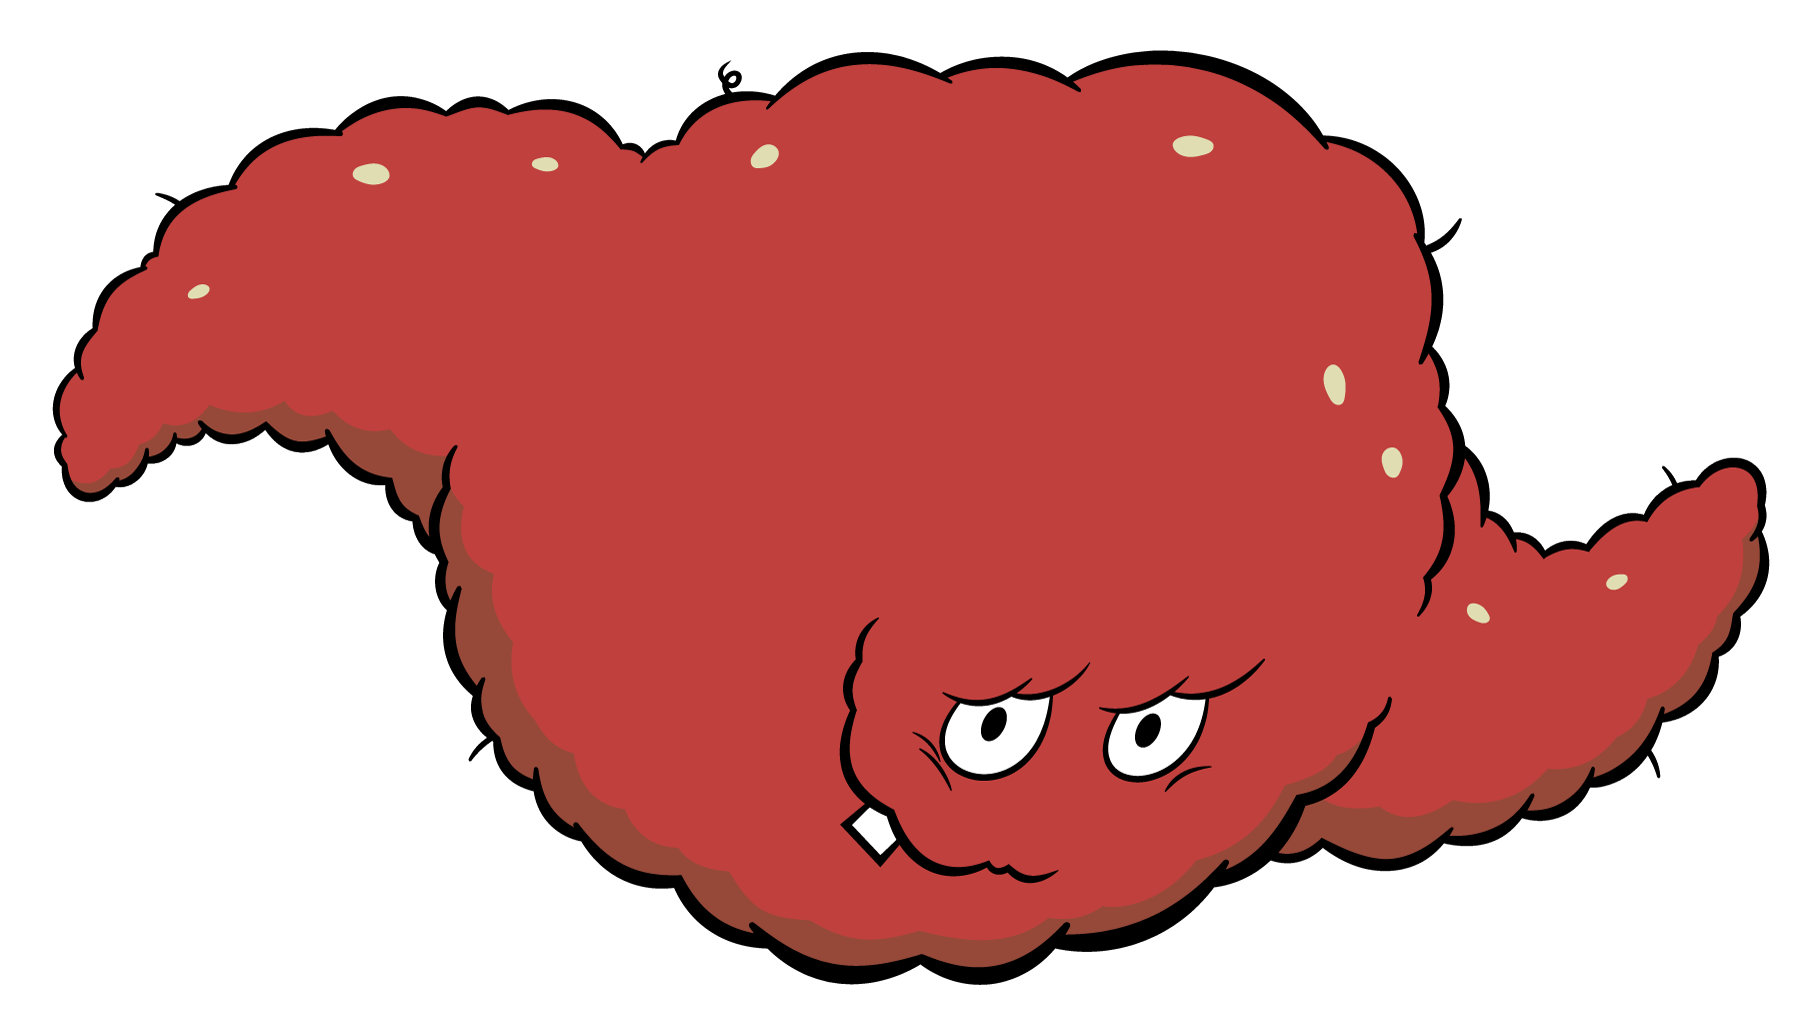 Meatwad thenx